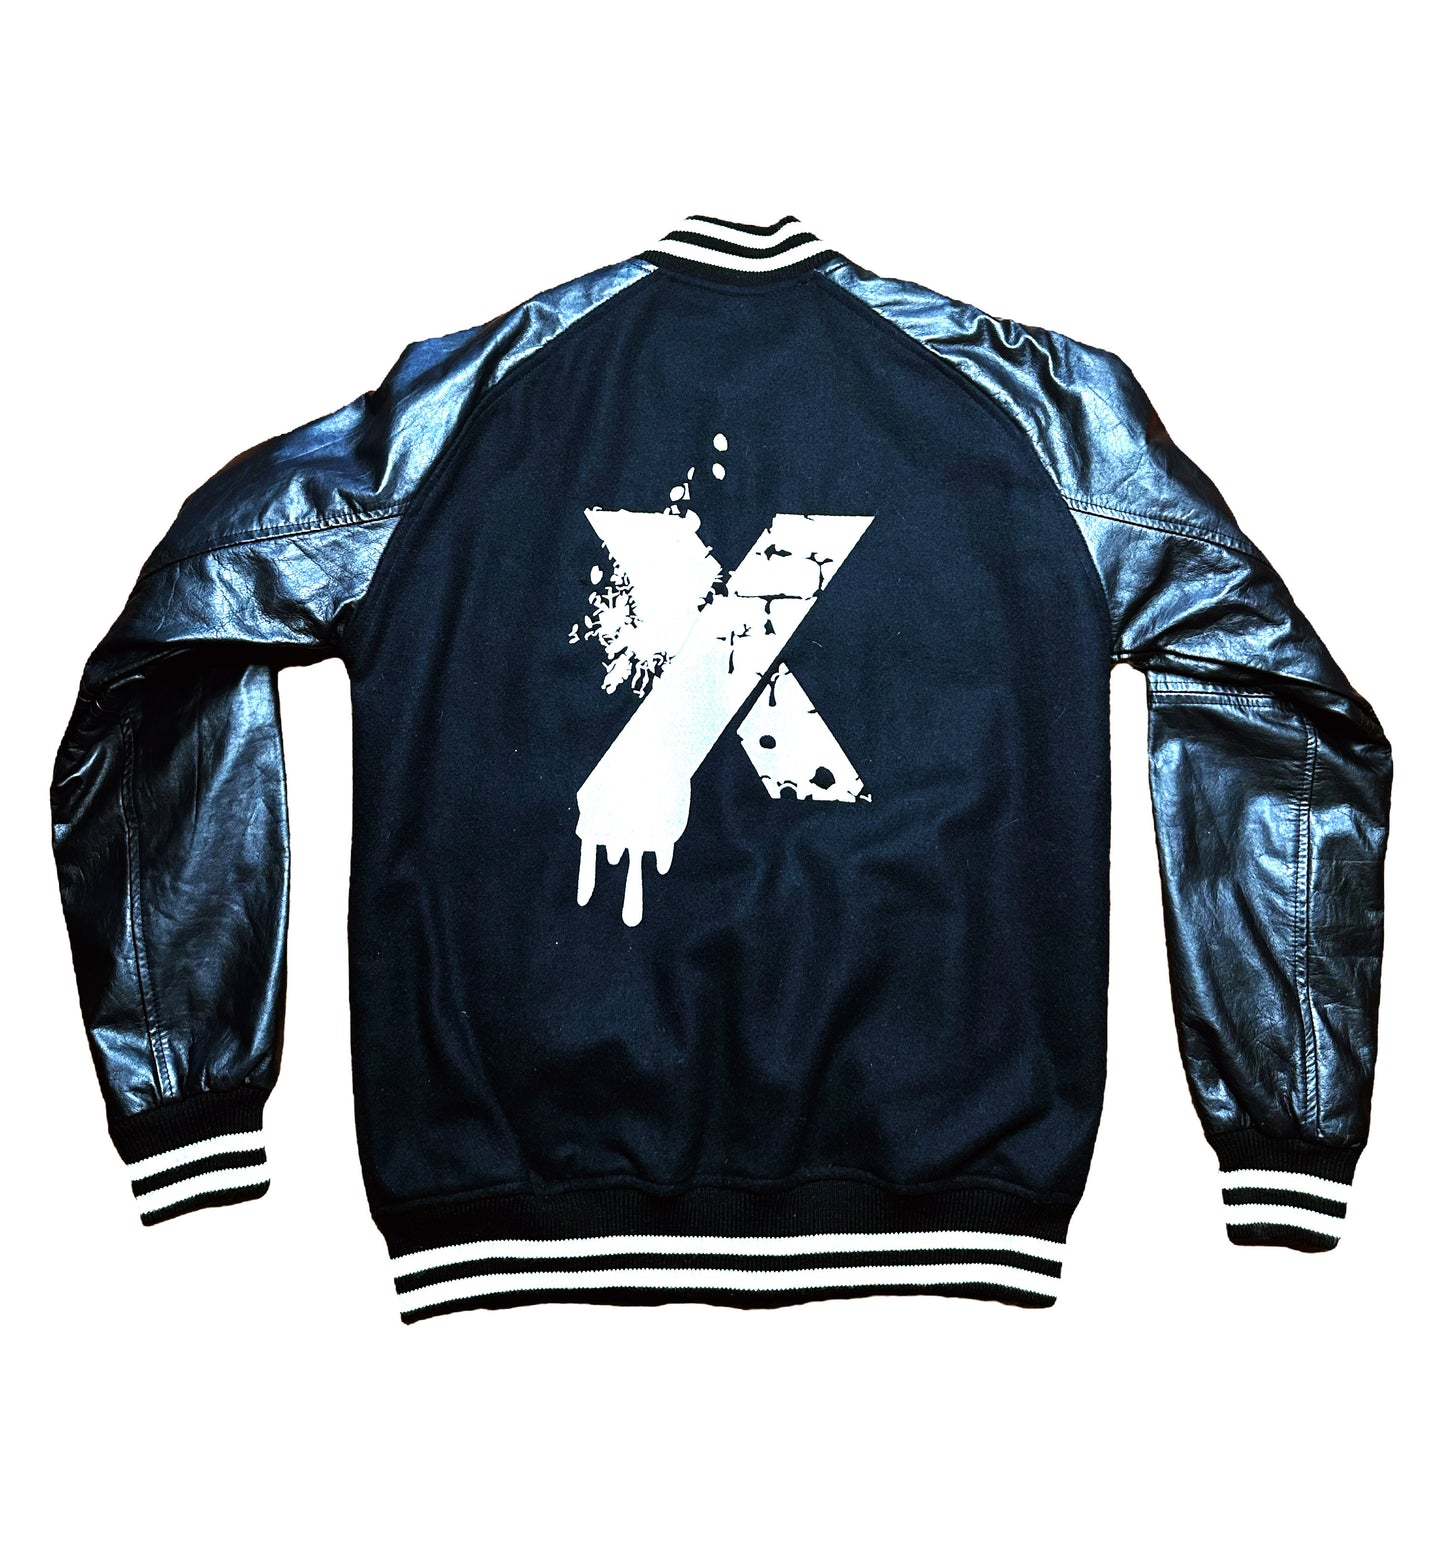 ANY MEANS Malcolm X 1965 Letterman Varsity